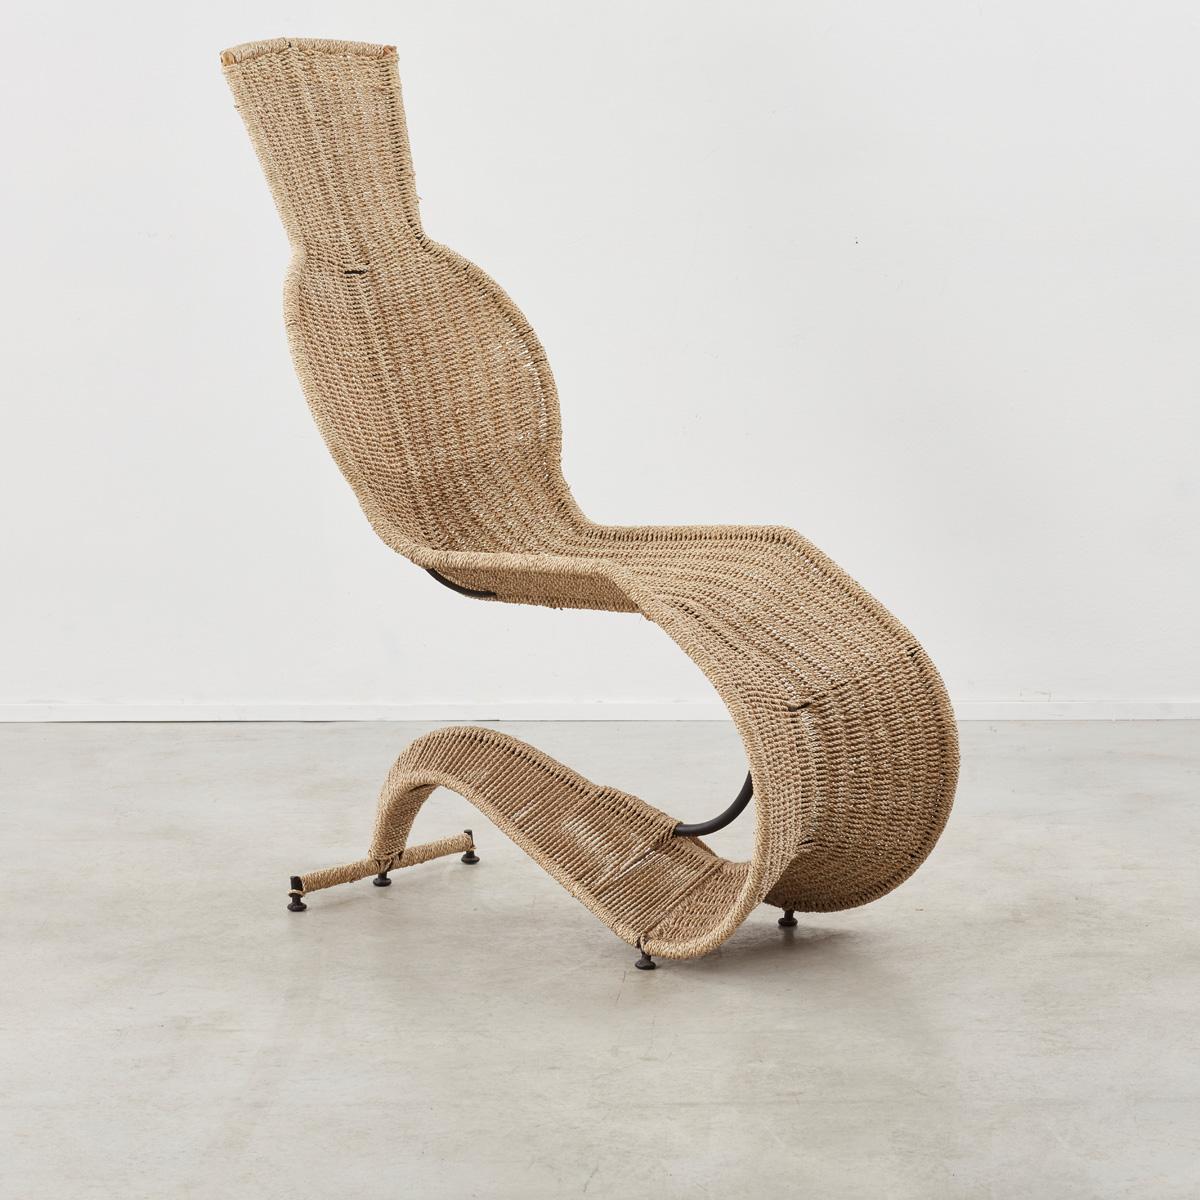 A rare lounge chair by British designer Tom Dixon for Space Design. A delicate braided rope has been systematically woven across its iron frame, a method Dixon employed in various early works. The chair is very comfortable and has a lovely spring to